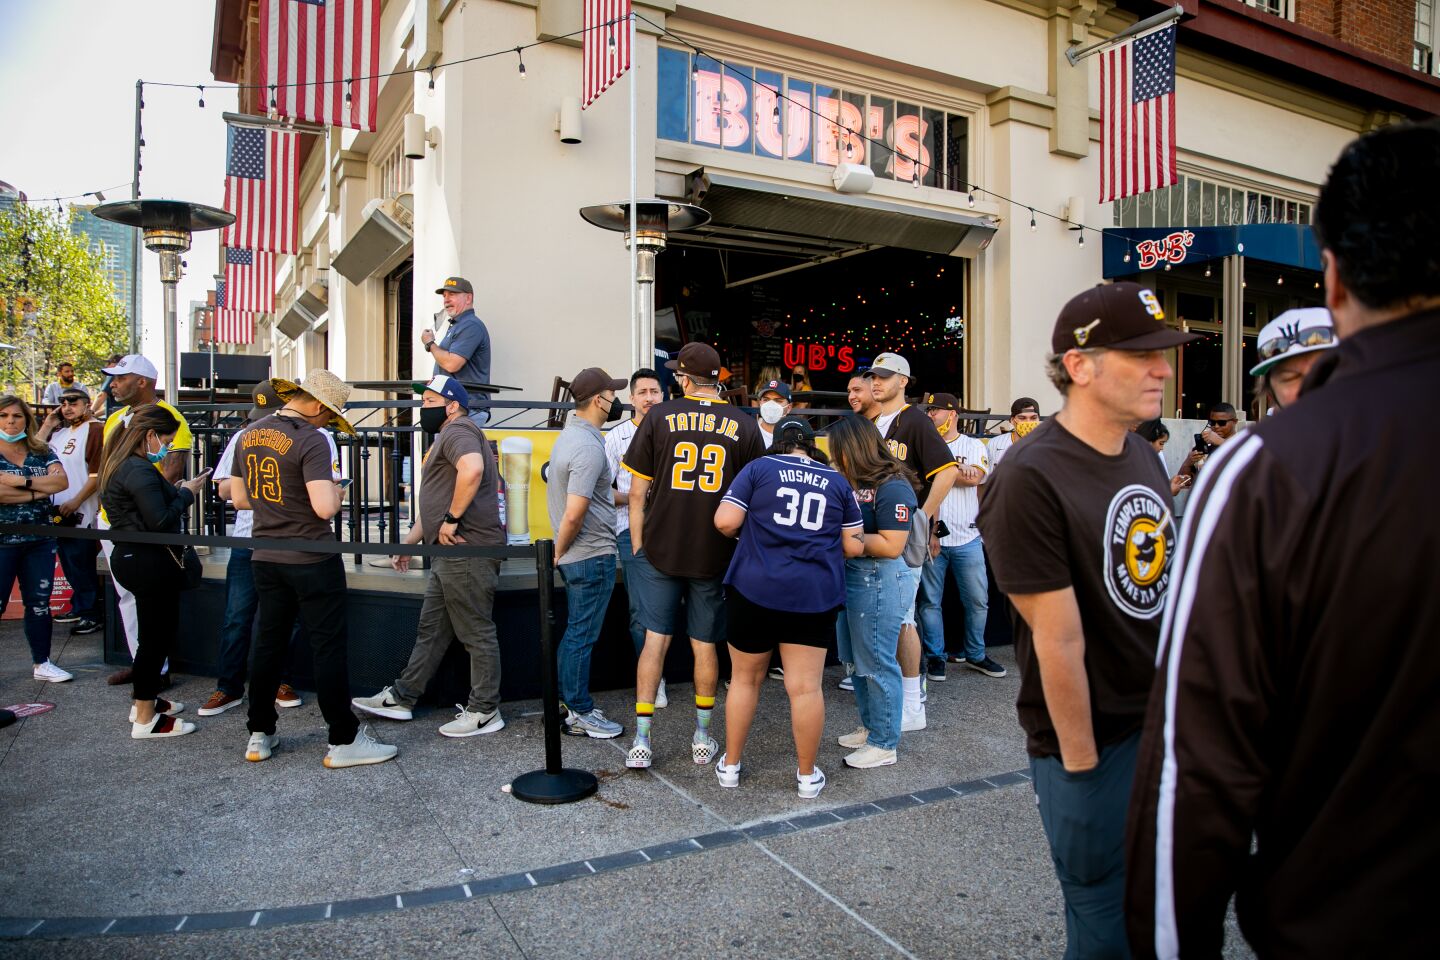 Fans wait in line outside Bub's by the Ballpark before the start of the Opening Day game between the San Diego Padres and the Arizona Diamondbacks in Downtown San Diego near Petco Park on Thursday, April 1, 2021 in San Diego, CA. The San Diego Padres welcomed a limited number of fans back into the stadium on Thursday for the first time since the beginning of the coronavirus pandemic.